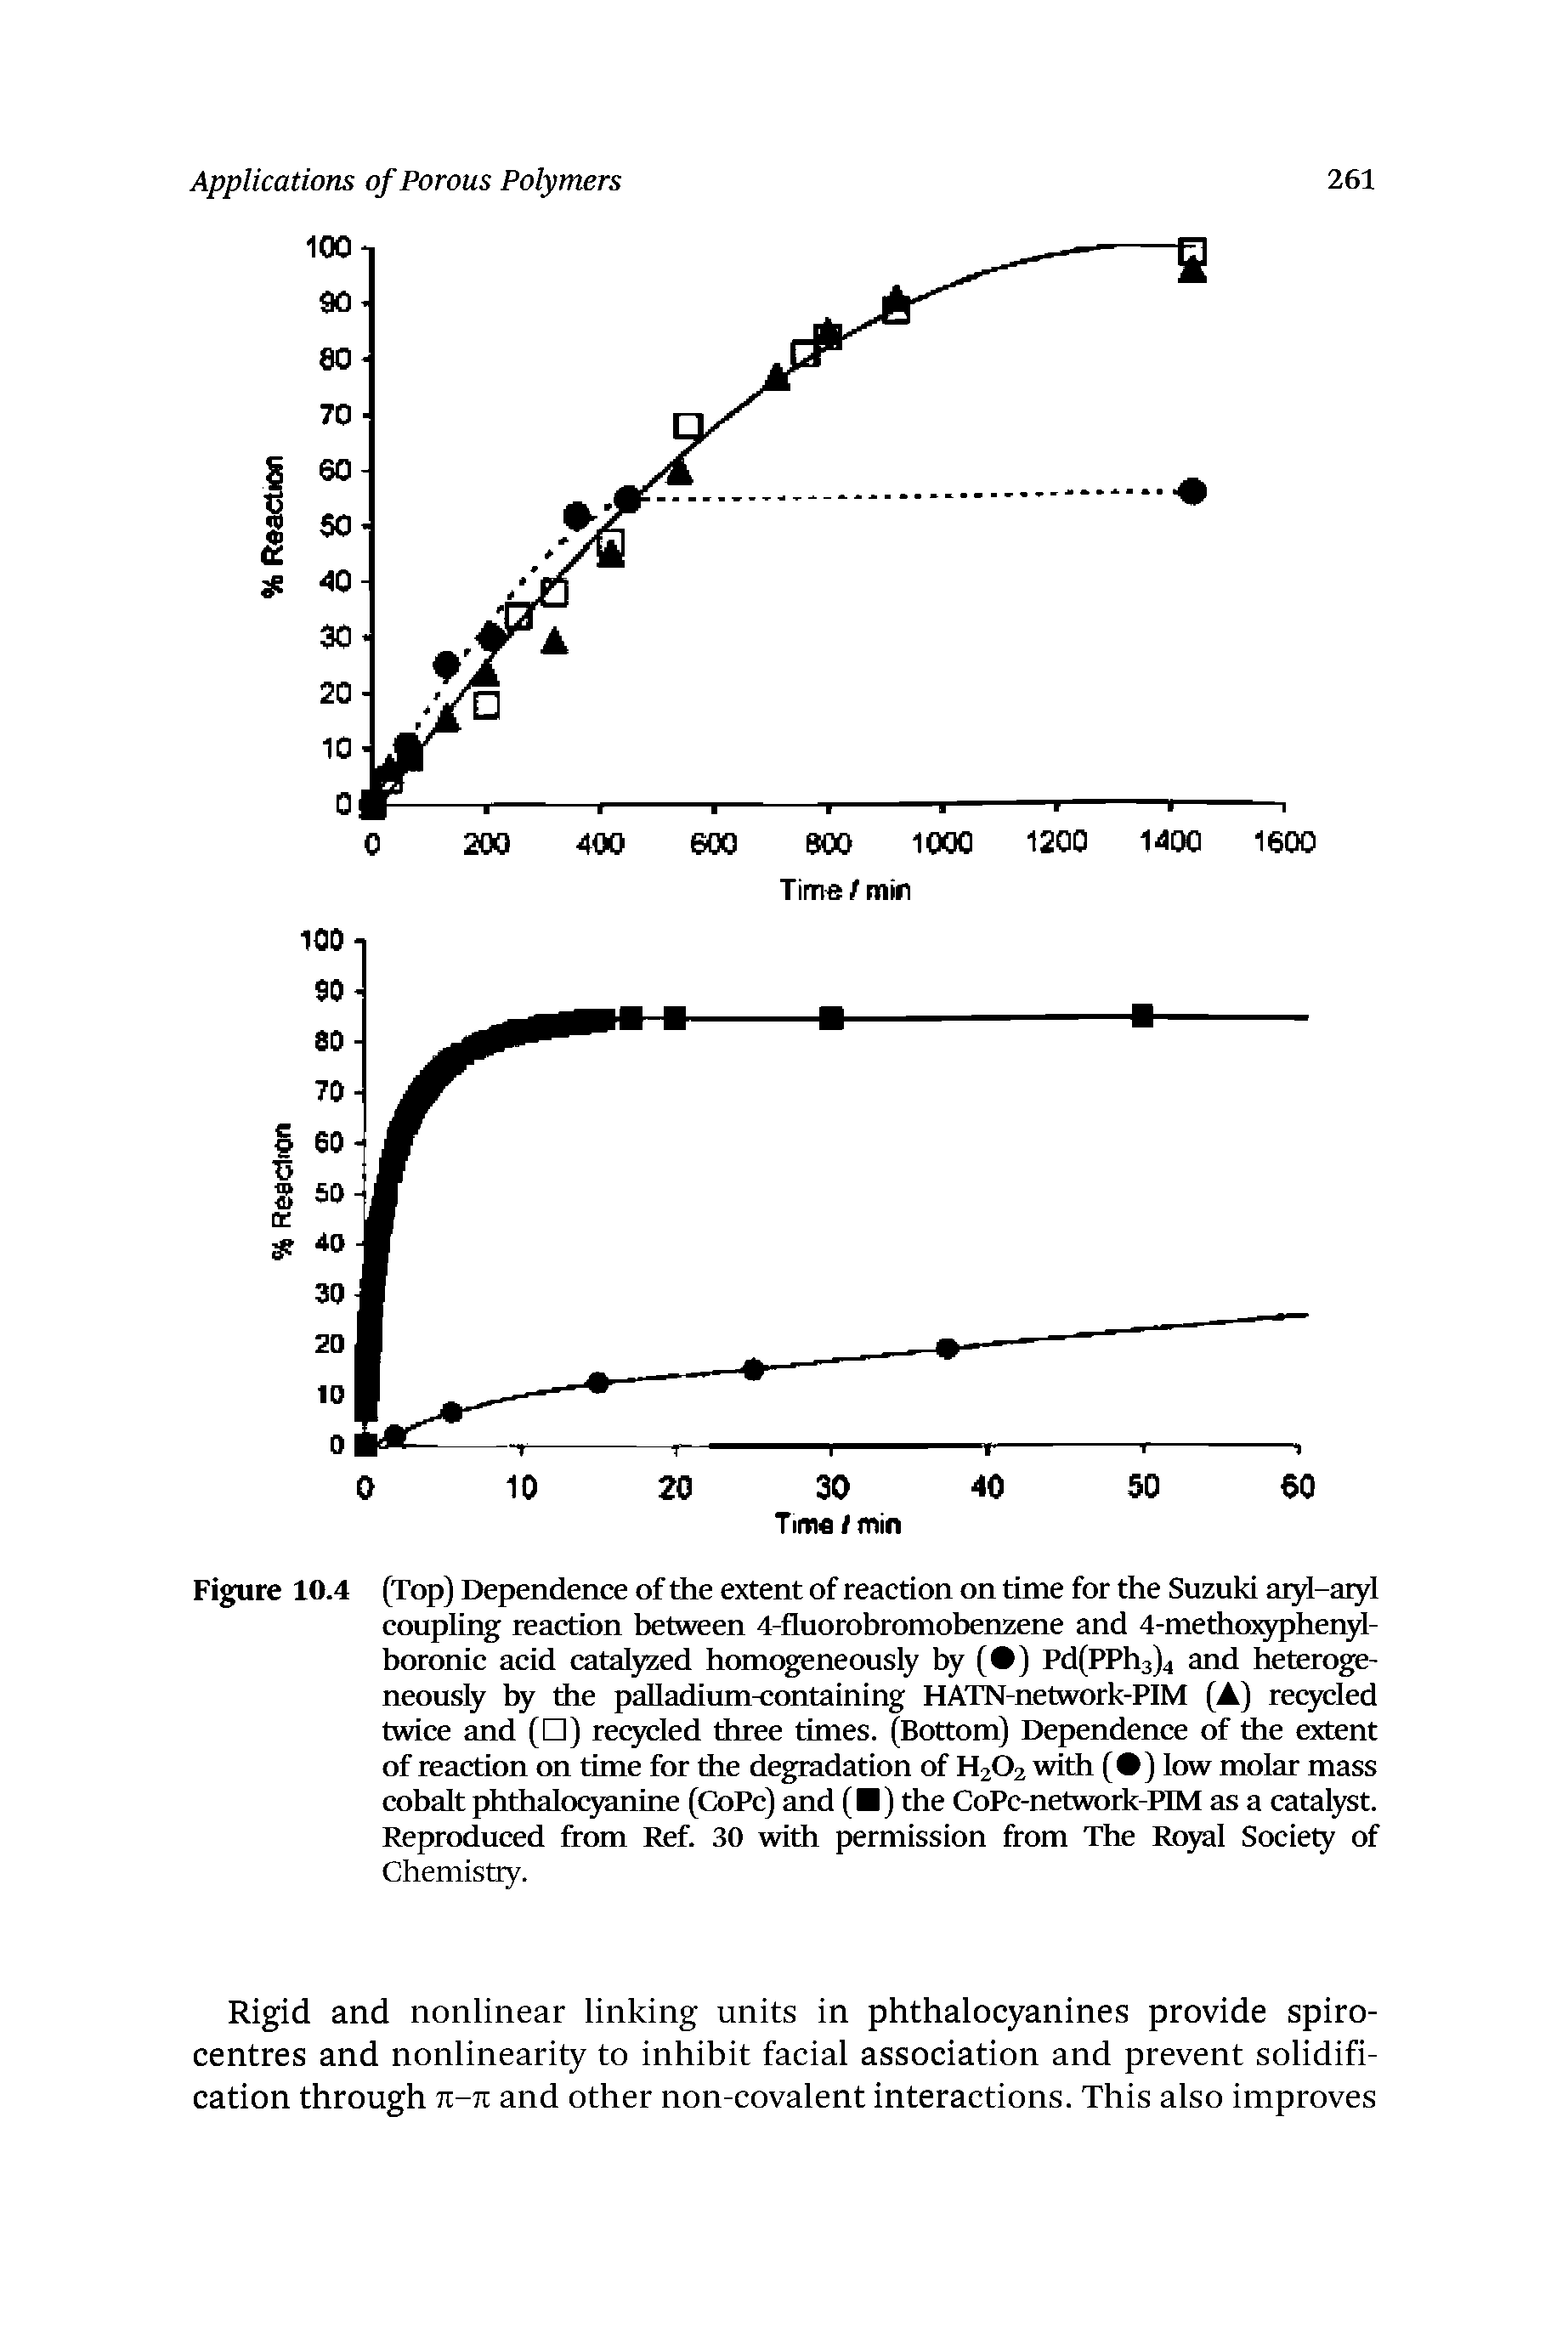 Figure 10.4 (Top) Dependence of the extent of reaction on time for the Suzuki aryl-aryl coupling reaction between 4-fluorohromohenzene and 4-metho3yphenyl-horonic acid catalyzed homogeneously by ( ) Pd(PPh3)4 and heterogeneously by the palladium-containing HATN-network-PIM (A) recycled twice and ( ) recycled three times. (Bottom) Dependence of the extent of reaction on time for the degradation of H2O2 with ( ) low molar mass cobalt phthalocyanine (CoPc) and ( ) the CoPc-network-PIM as a catalyst. Reproduced from Ref. 30 with permission from The Royal Society of Chemistry.